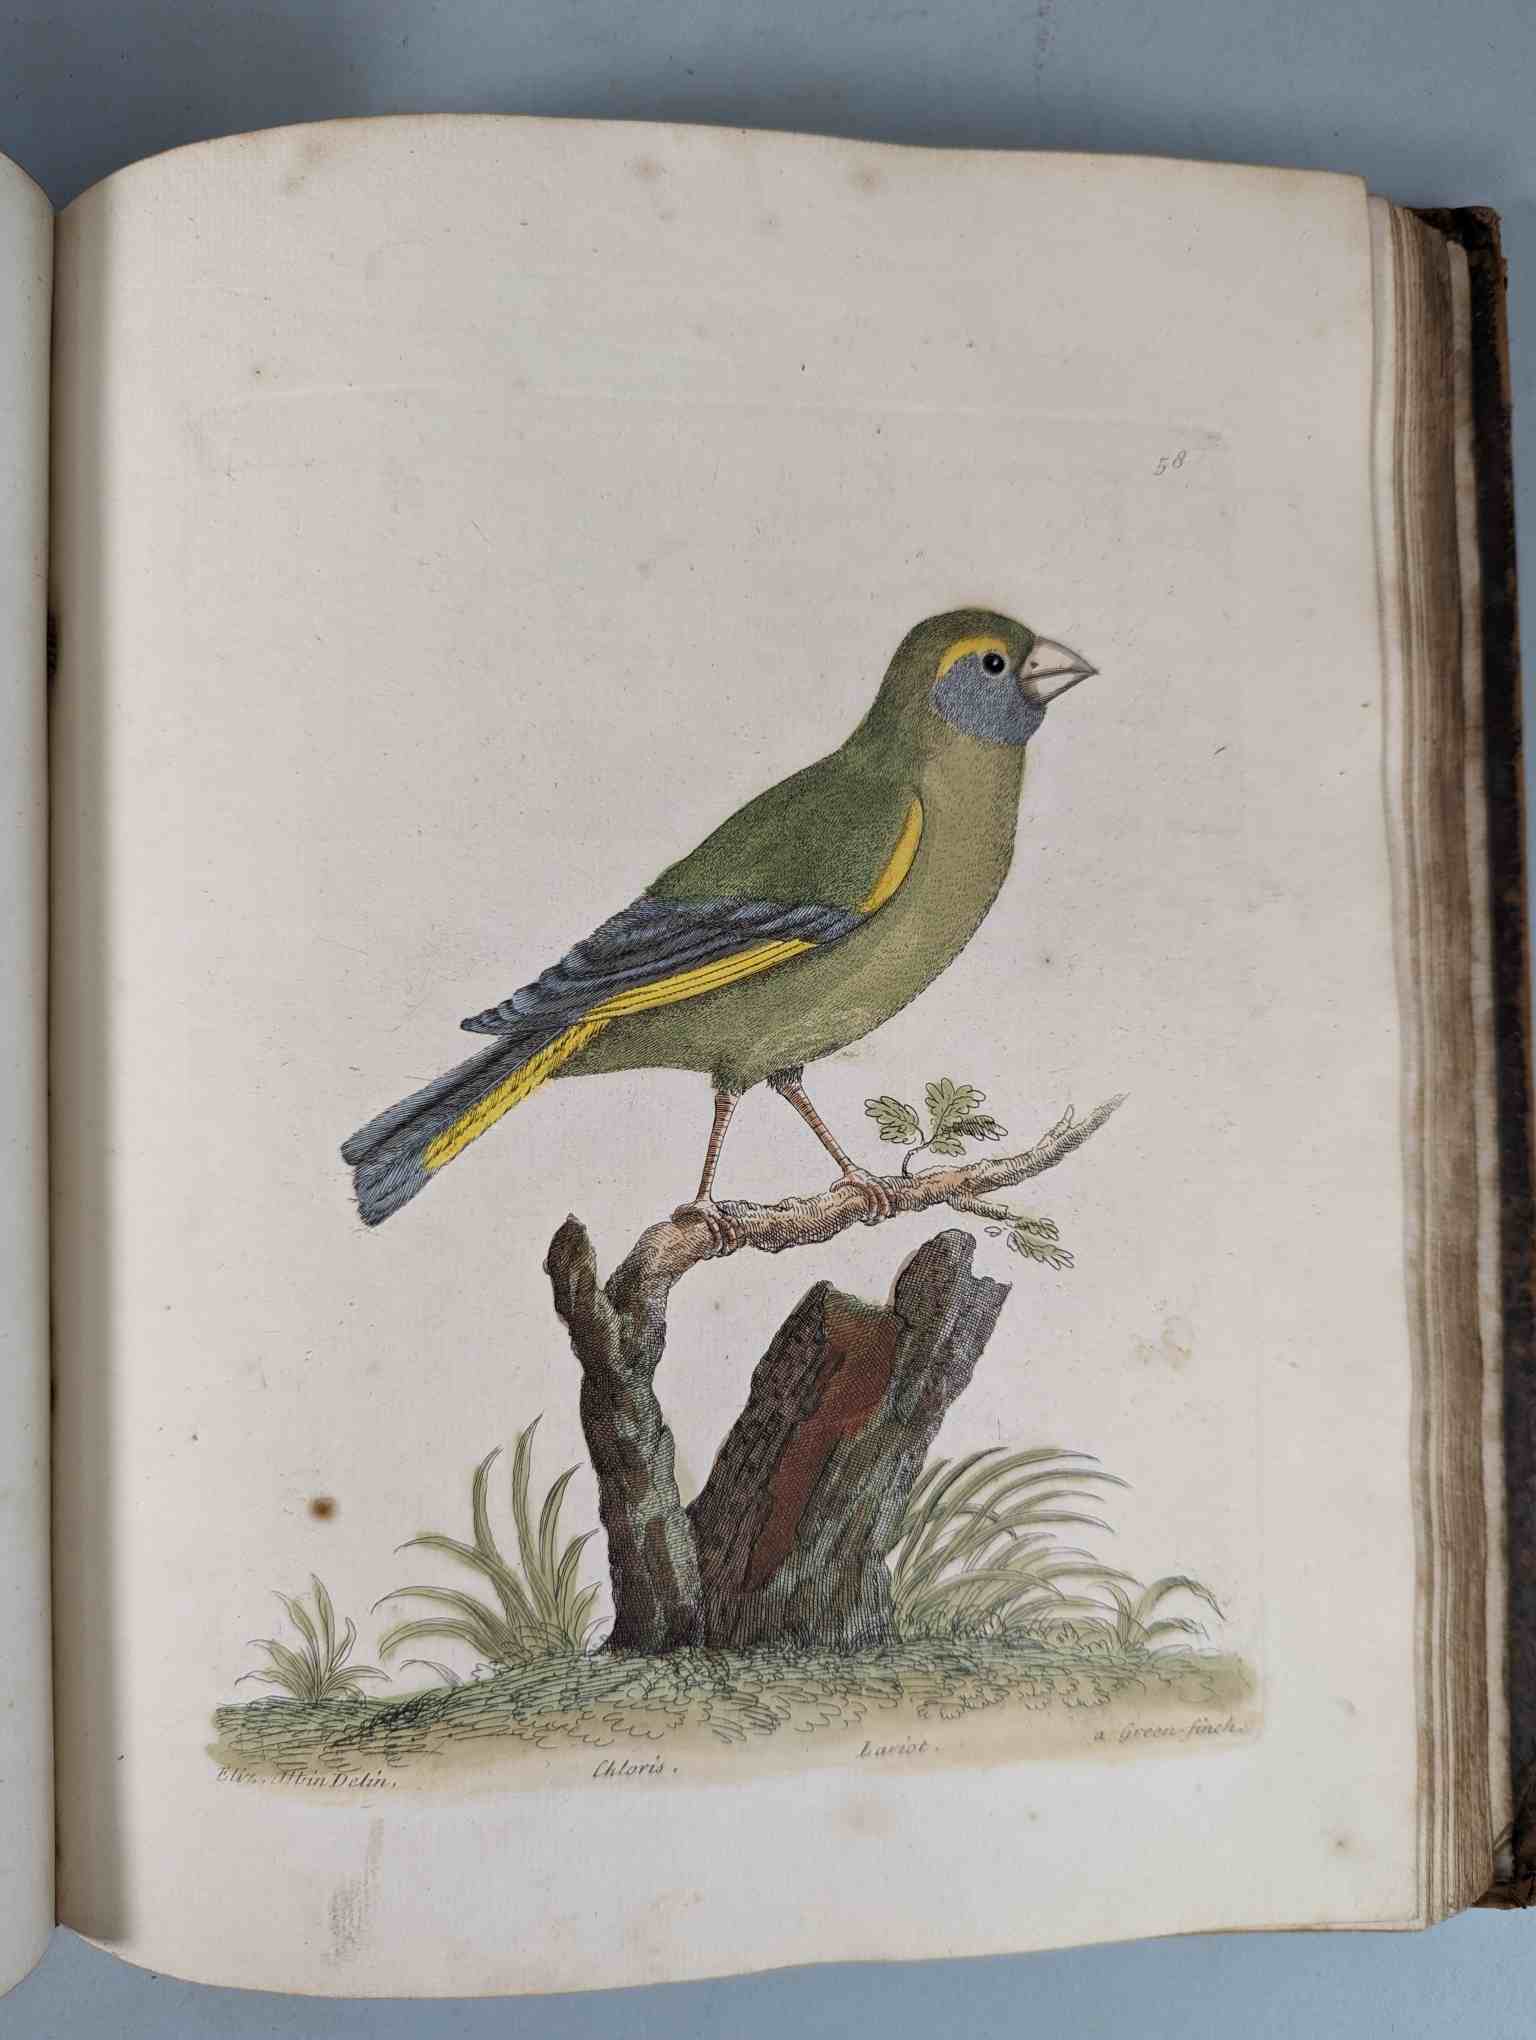 ALBIN, Eleazar. A Natural History of Birds, to which are added, Notes and Observations by W. - Image 61 of 208